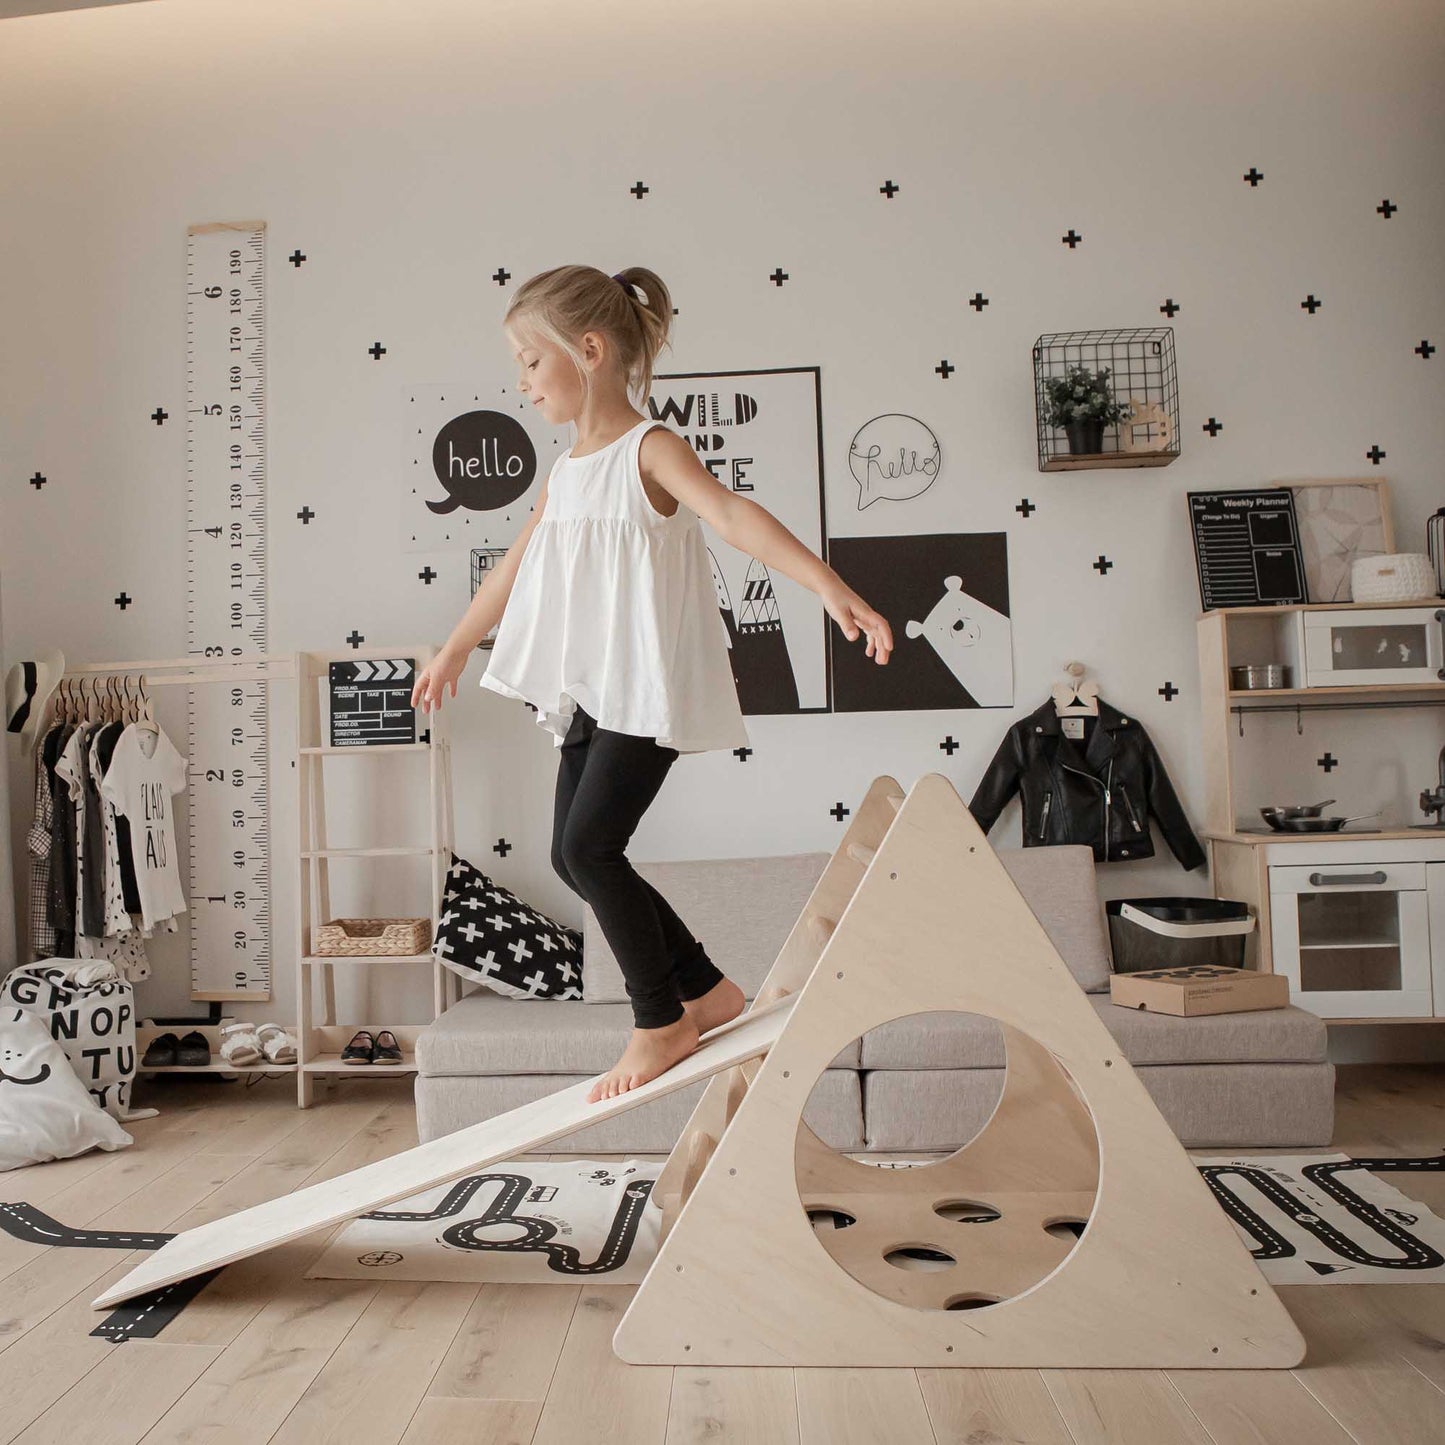 In her eco-friendly living room, a little girl is happily playing with a Climbing triangle + Foldable climbing triangle + a ramp toy.